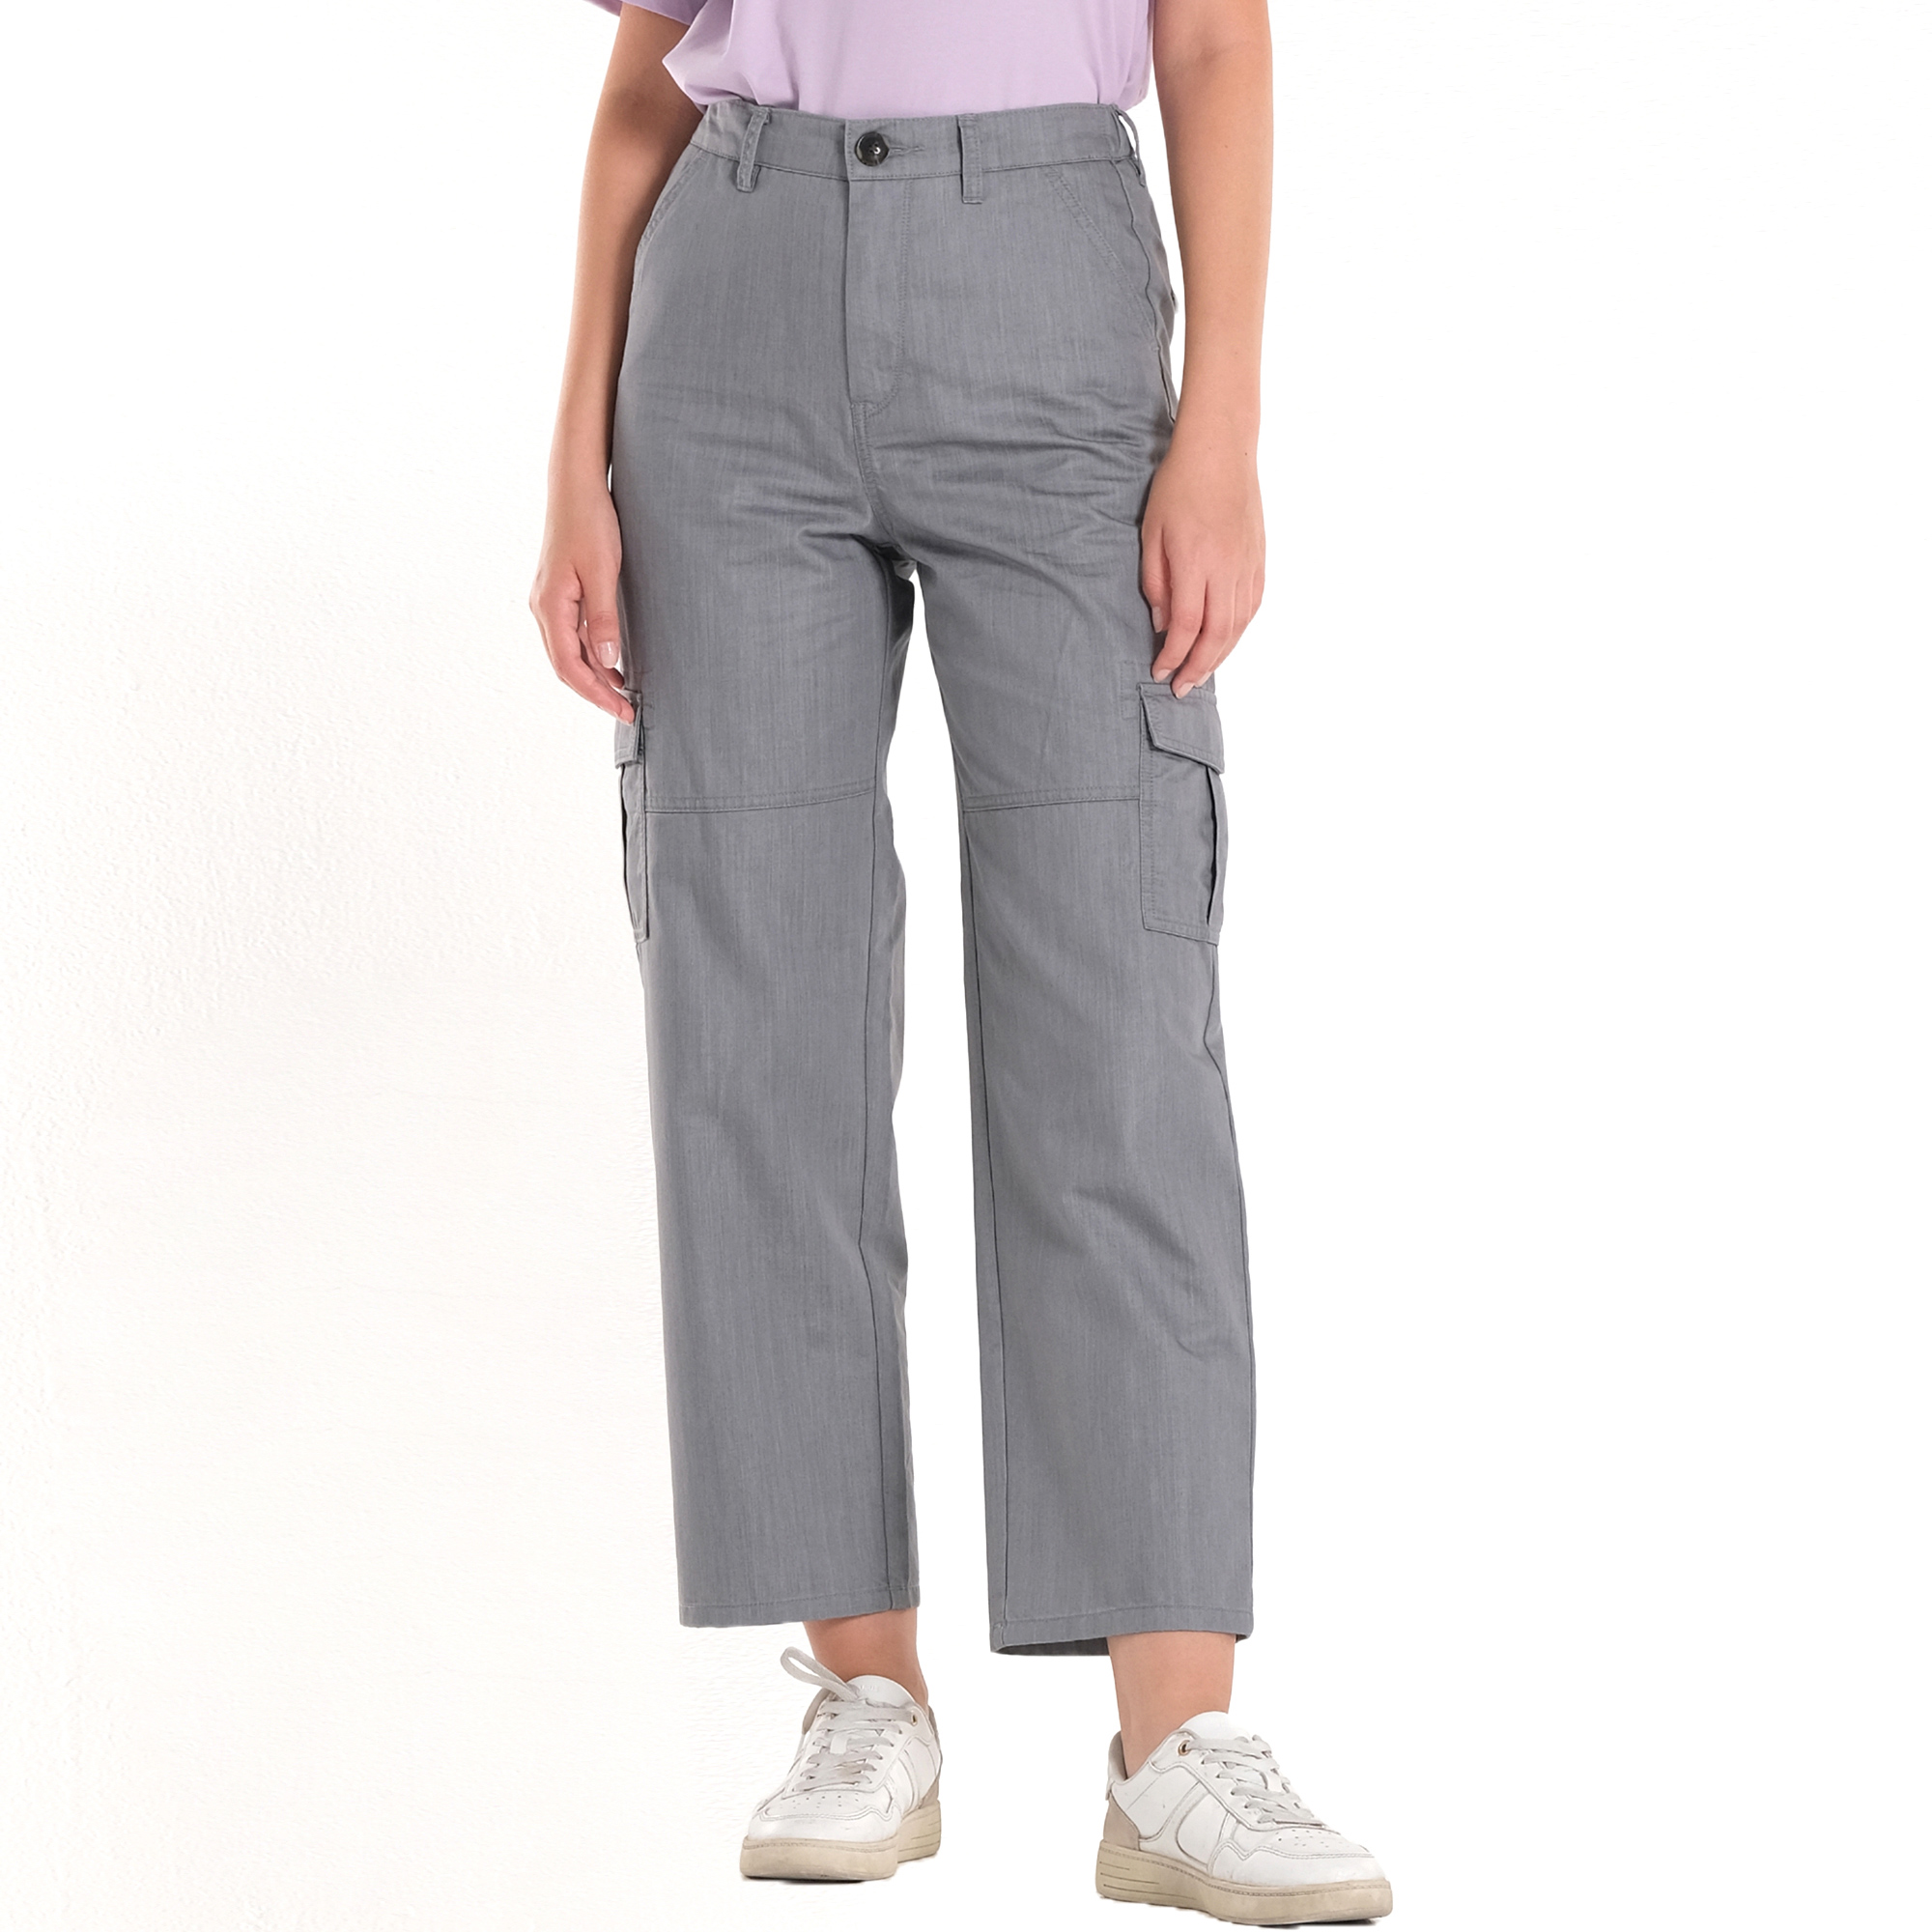 Pant Cargo Pants For Women Multiple Pockets Straight Cut Casual